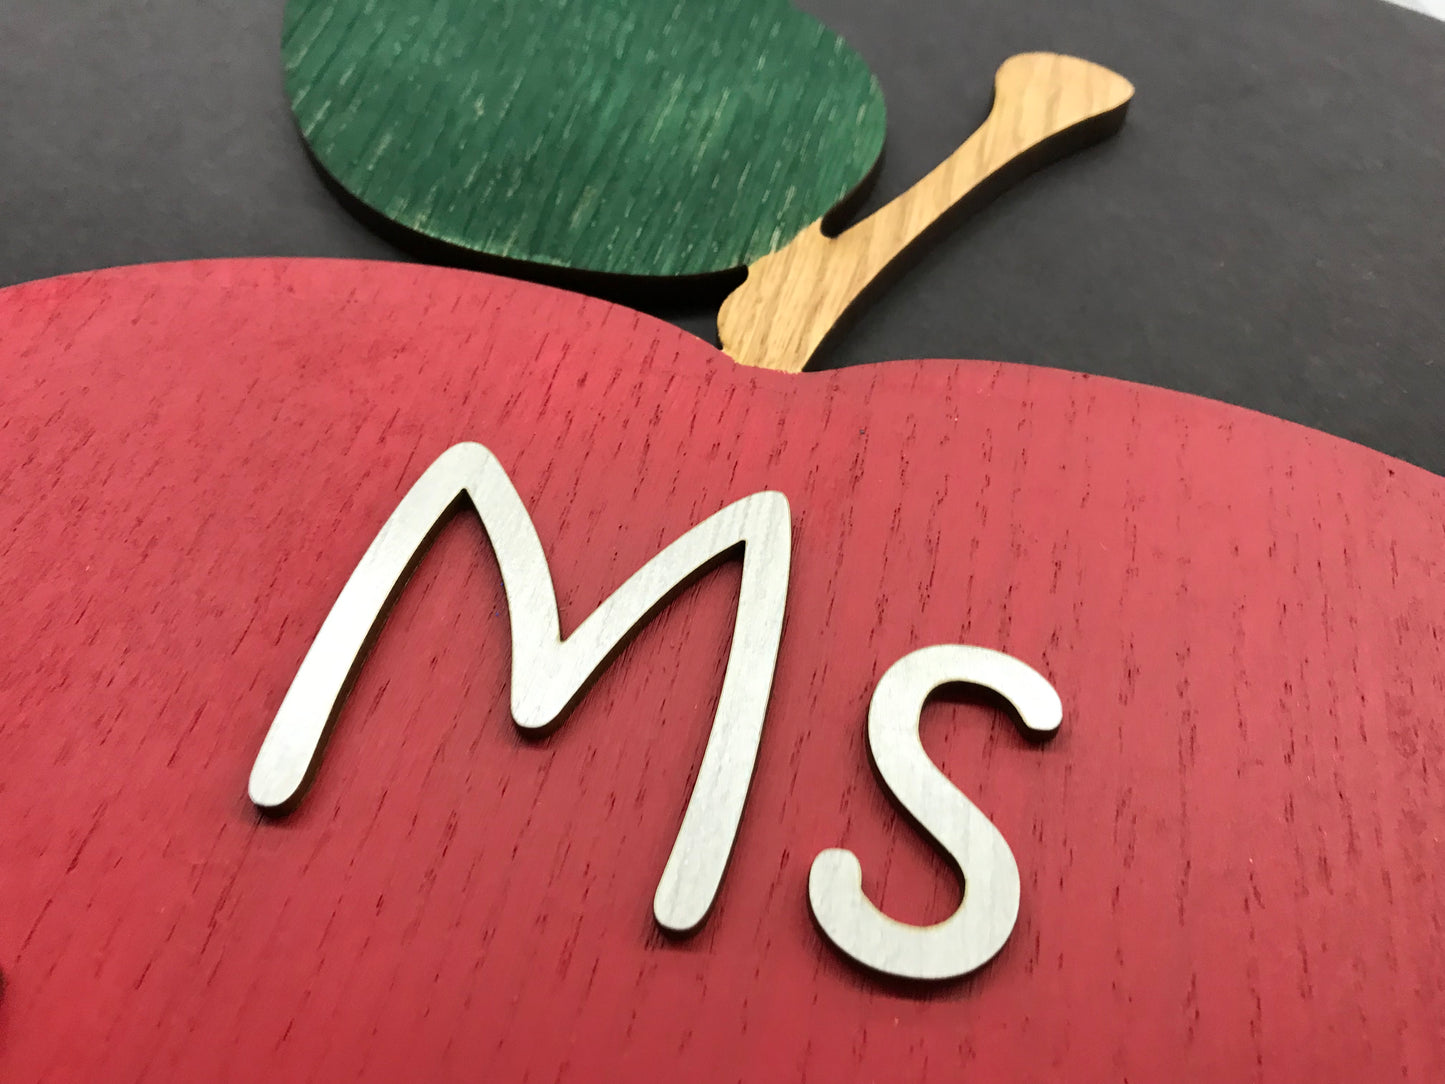 Teacher Apple Sign Personalized with Name